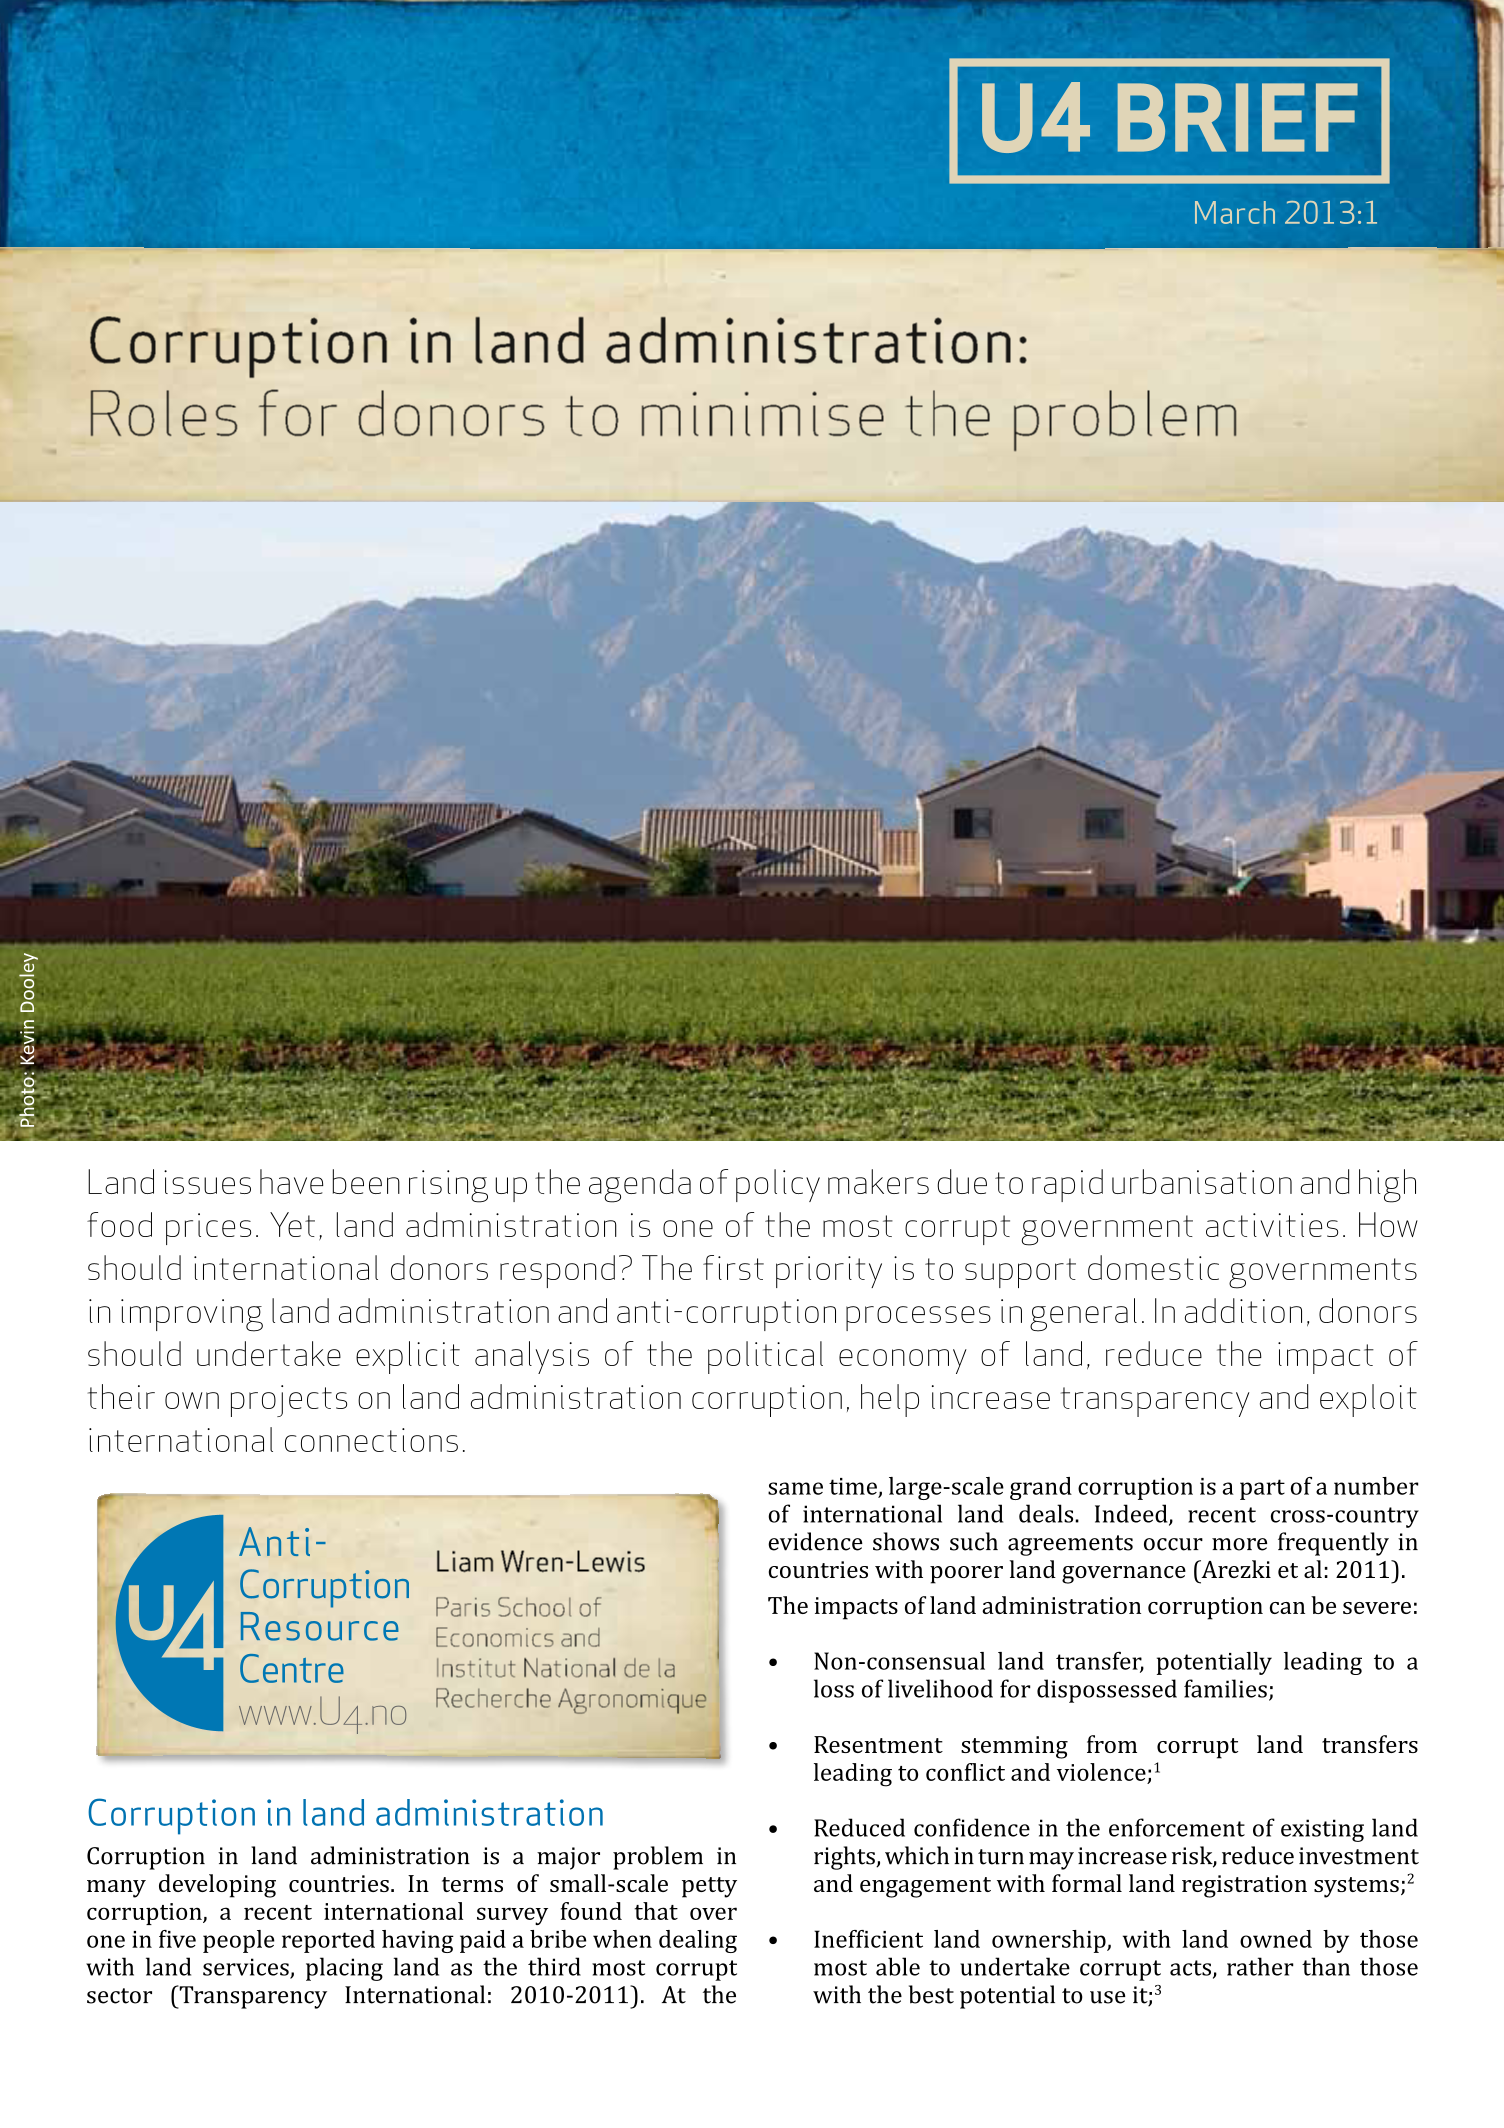 Corruption in land administration: Roles for donors to minimise the problem